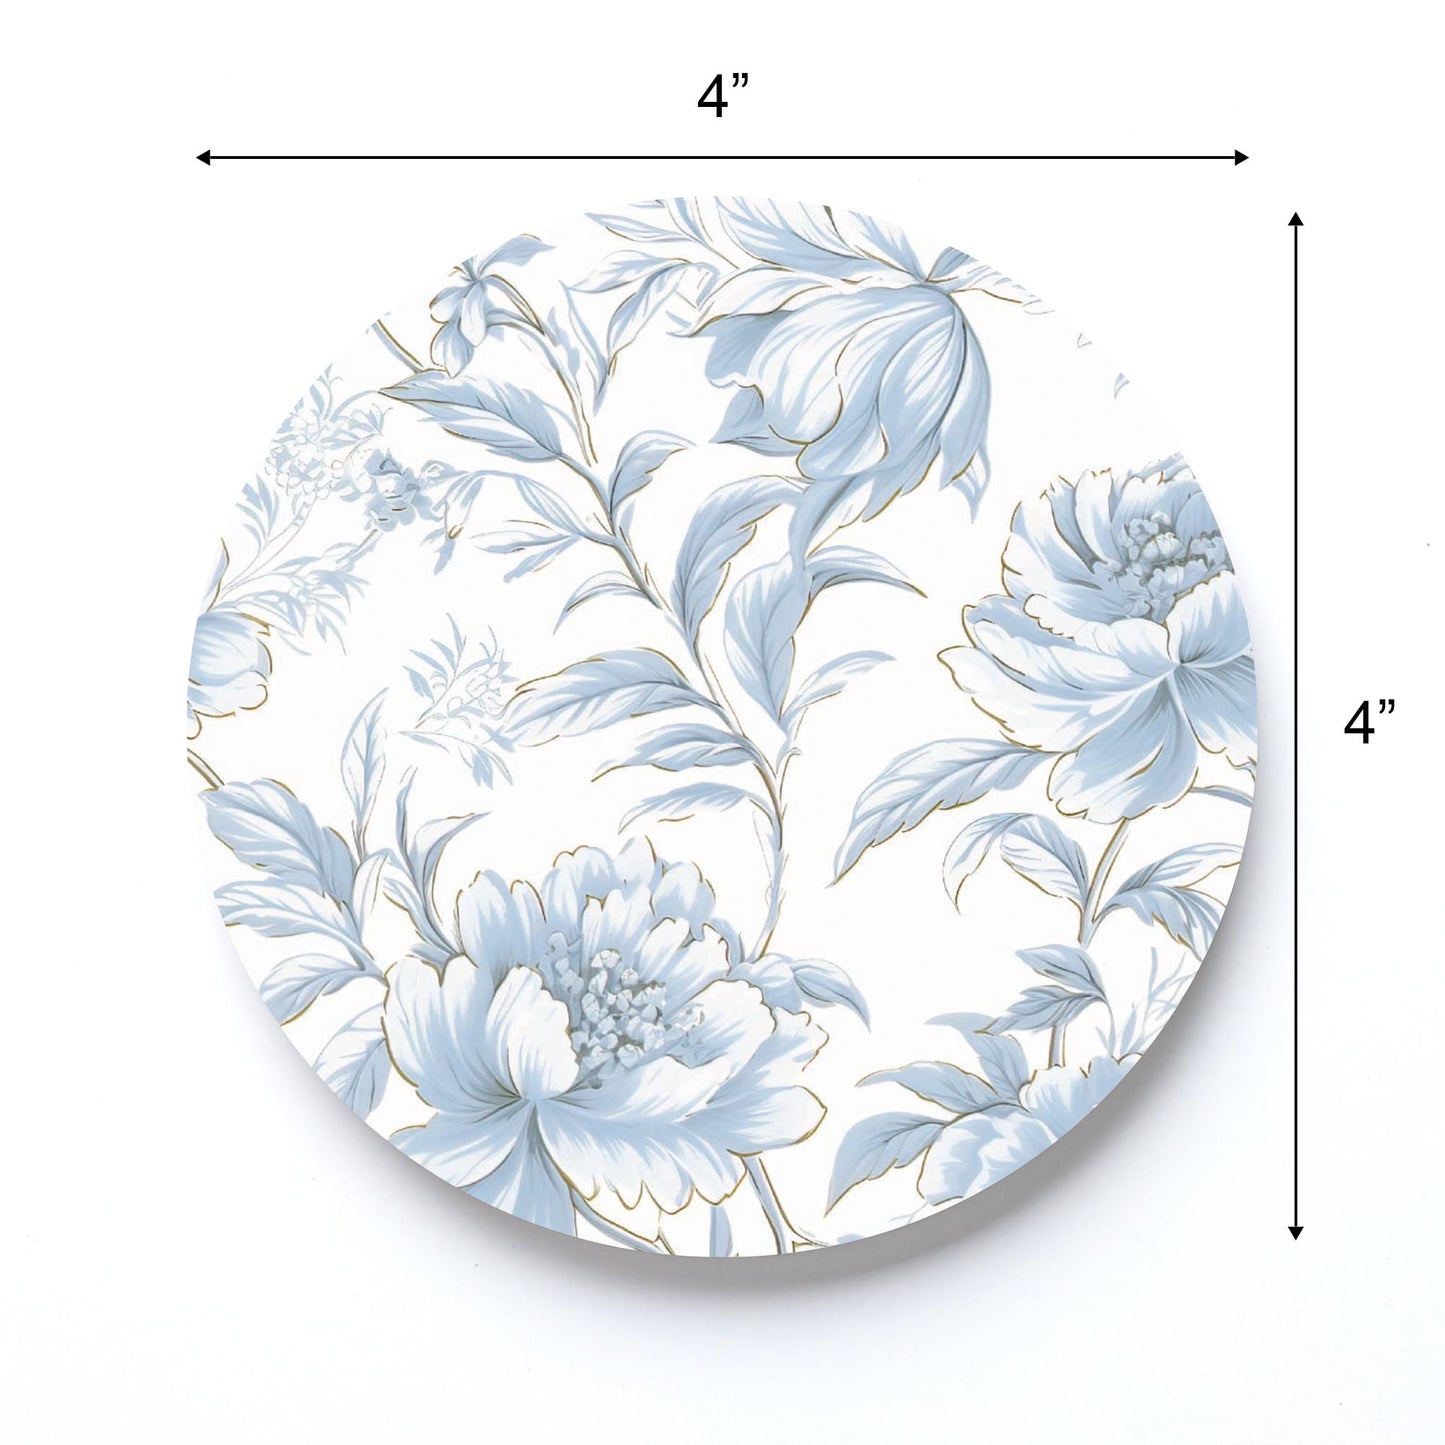 Chinoiserie Chic Wispy Floral Pattern